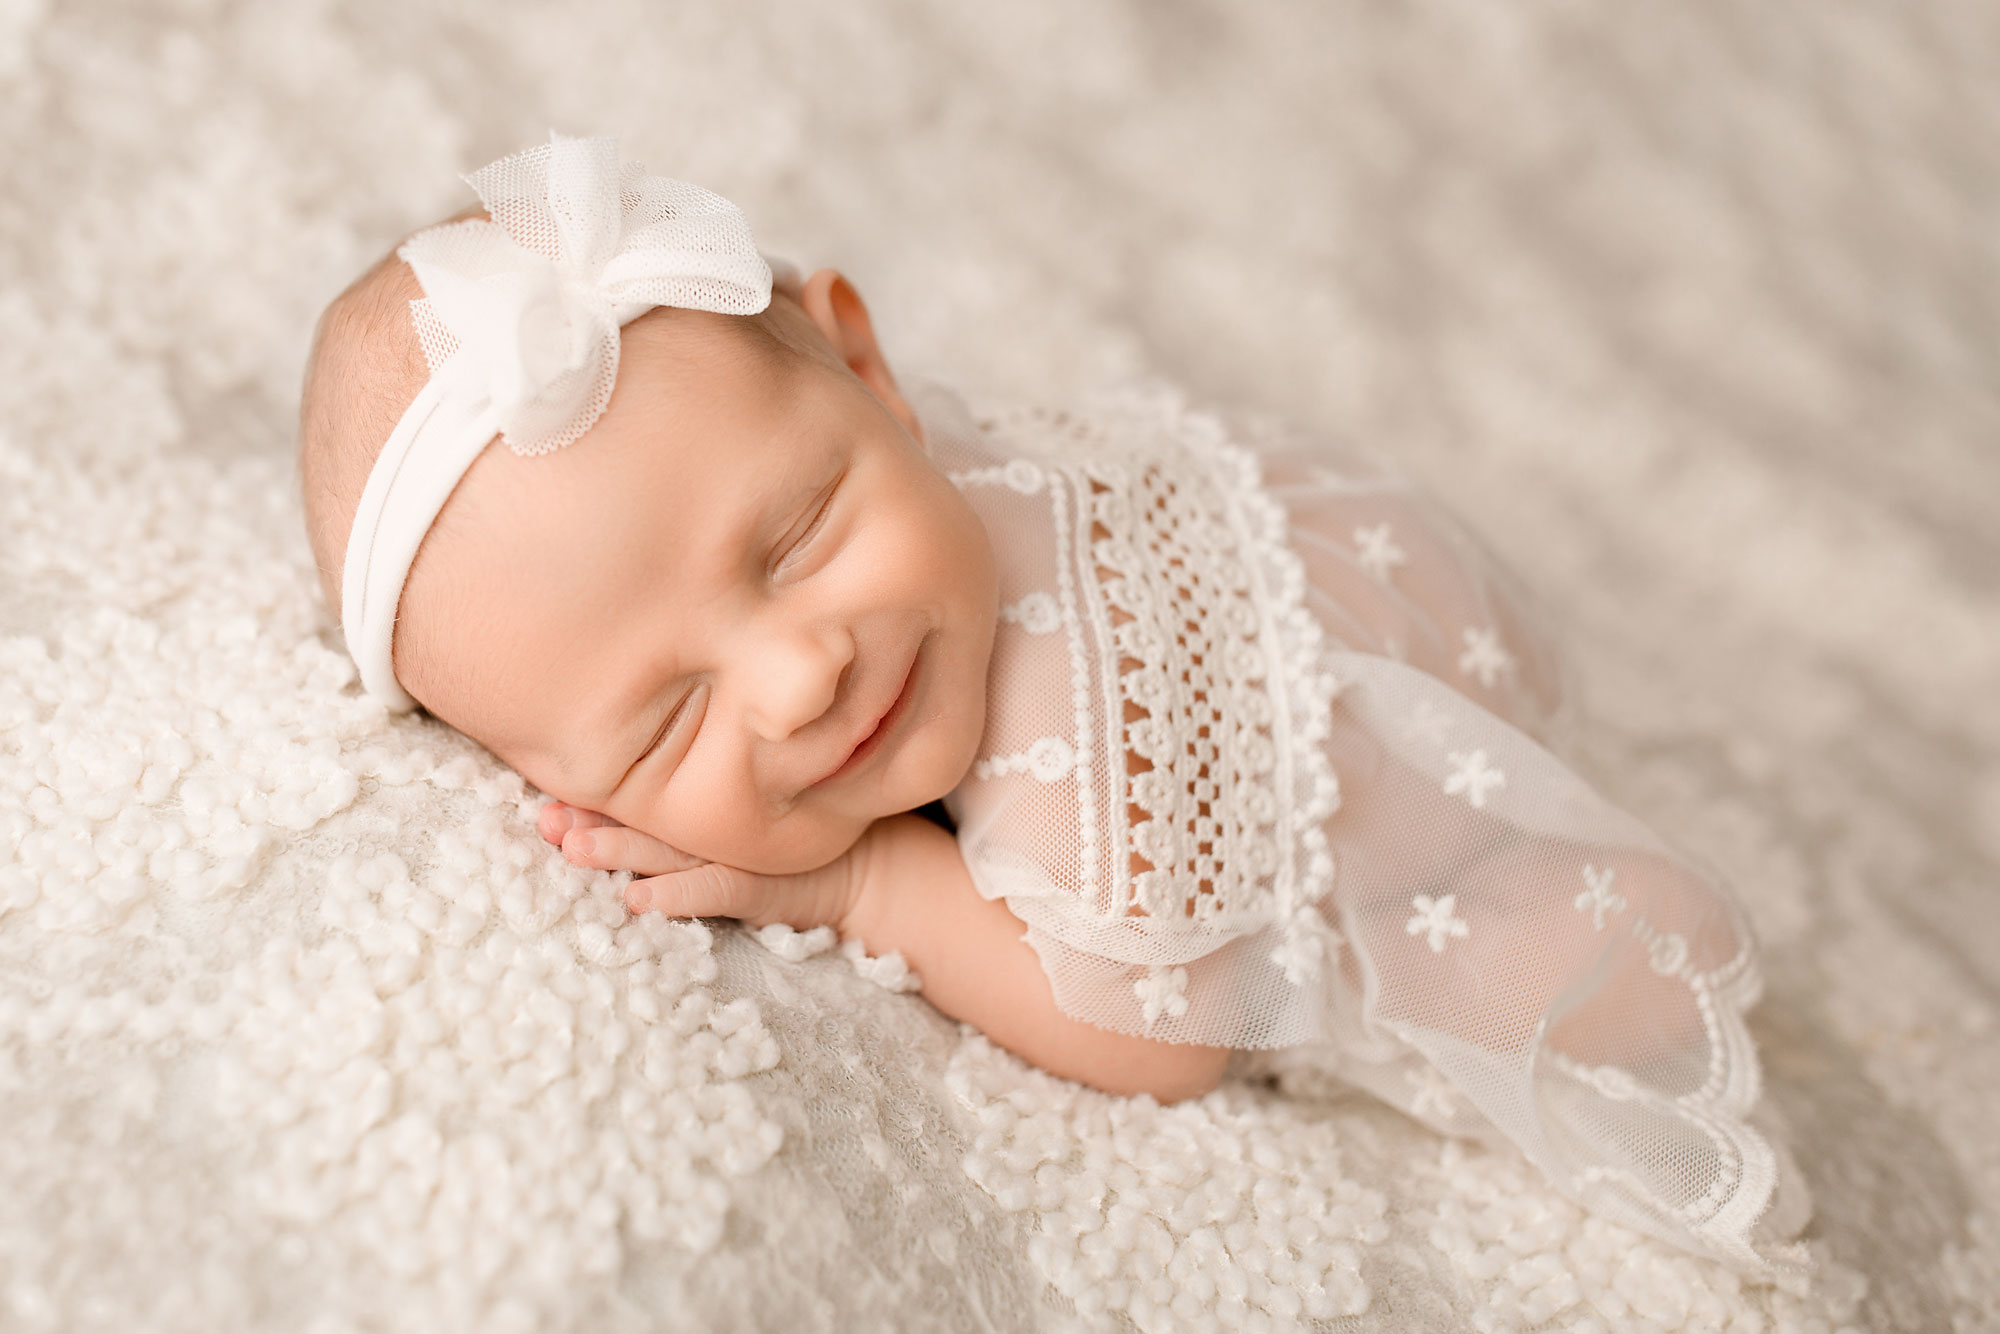 professional baby photography nj, smiling baby girl in sheer white dress